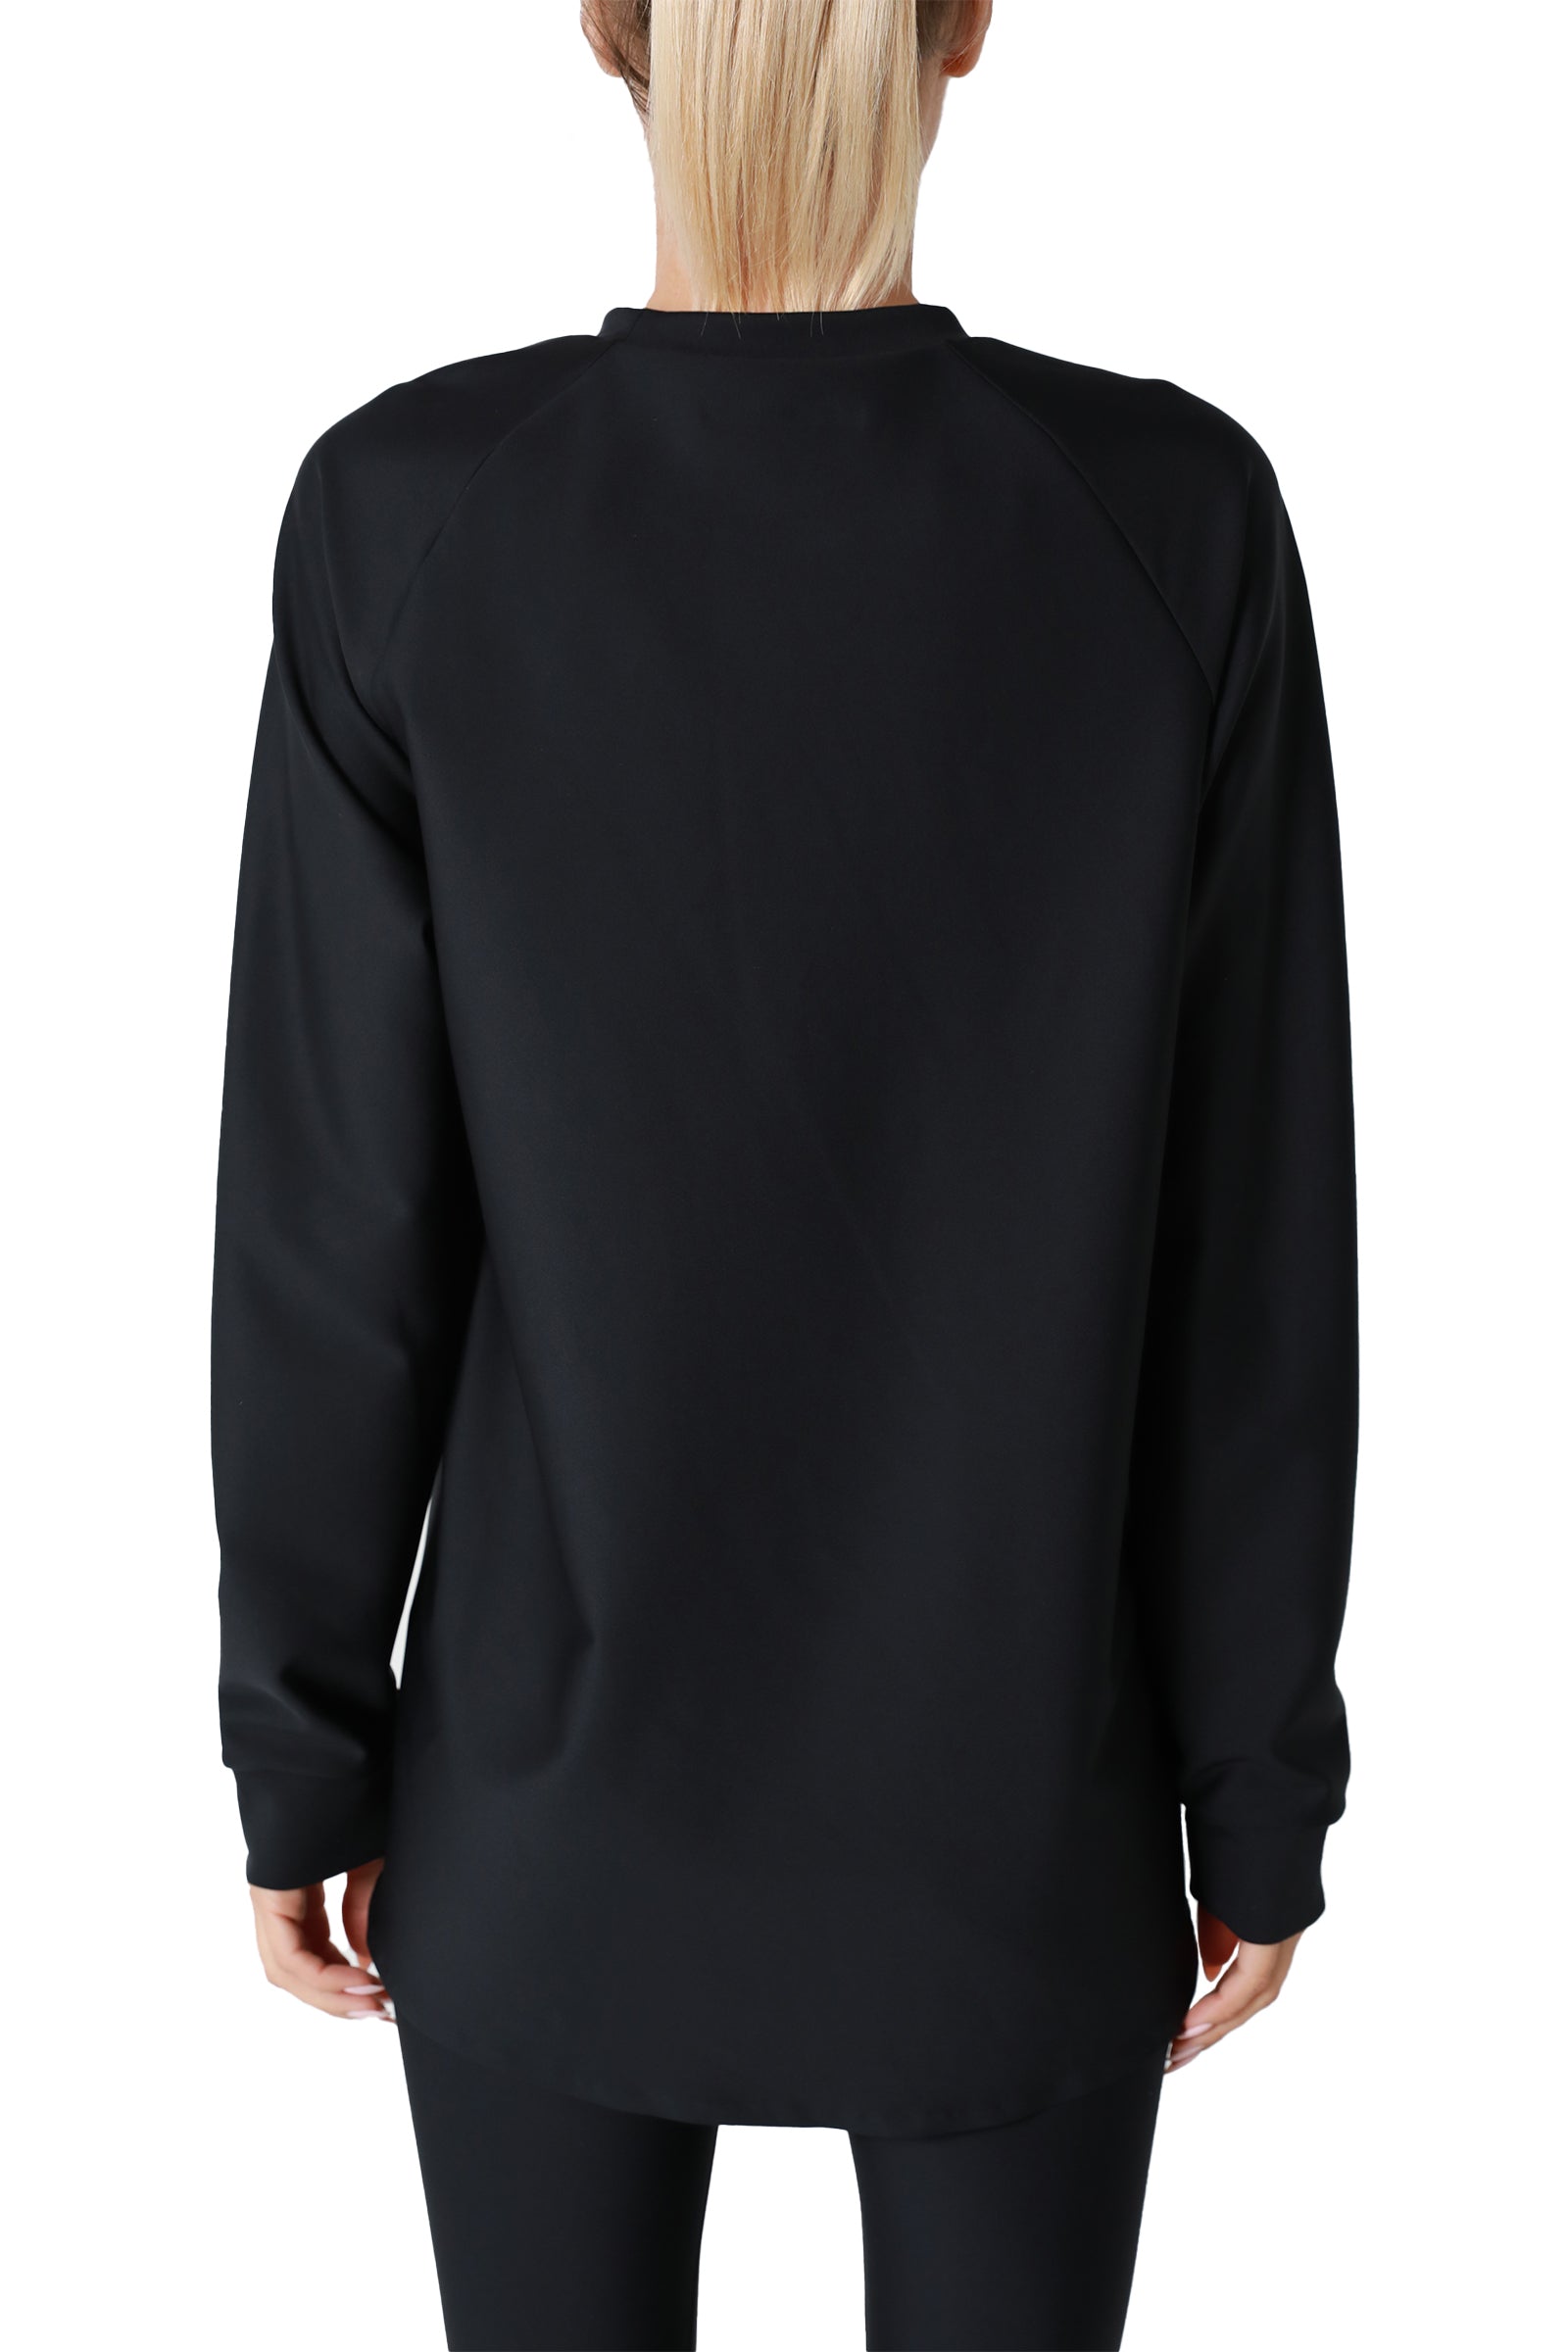 Lux Essential Long Sleeve Capella Top – Ultracor